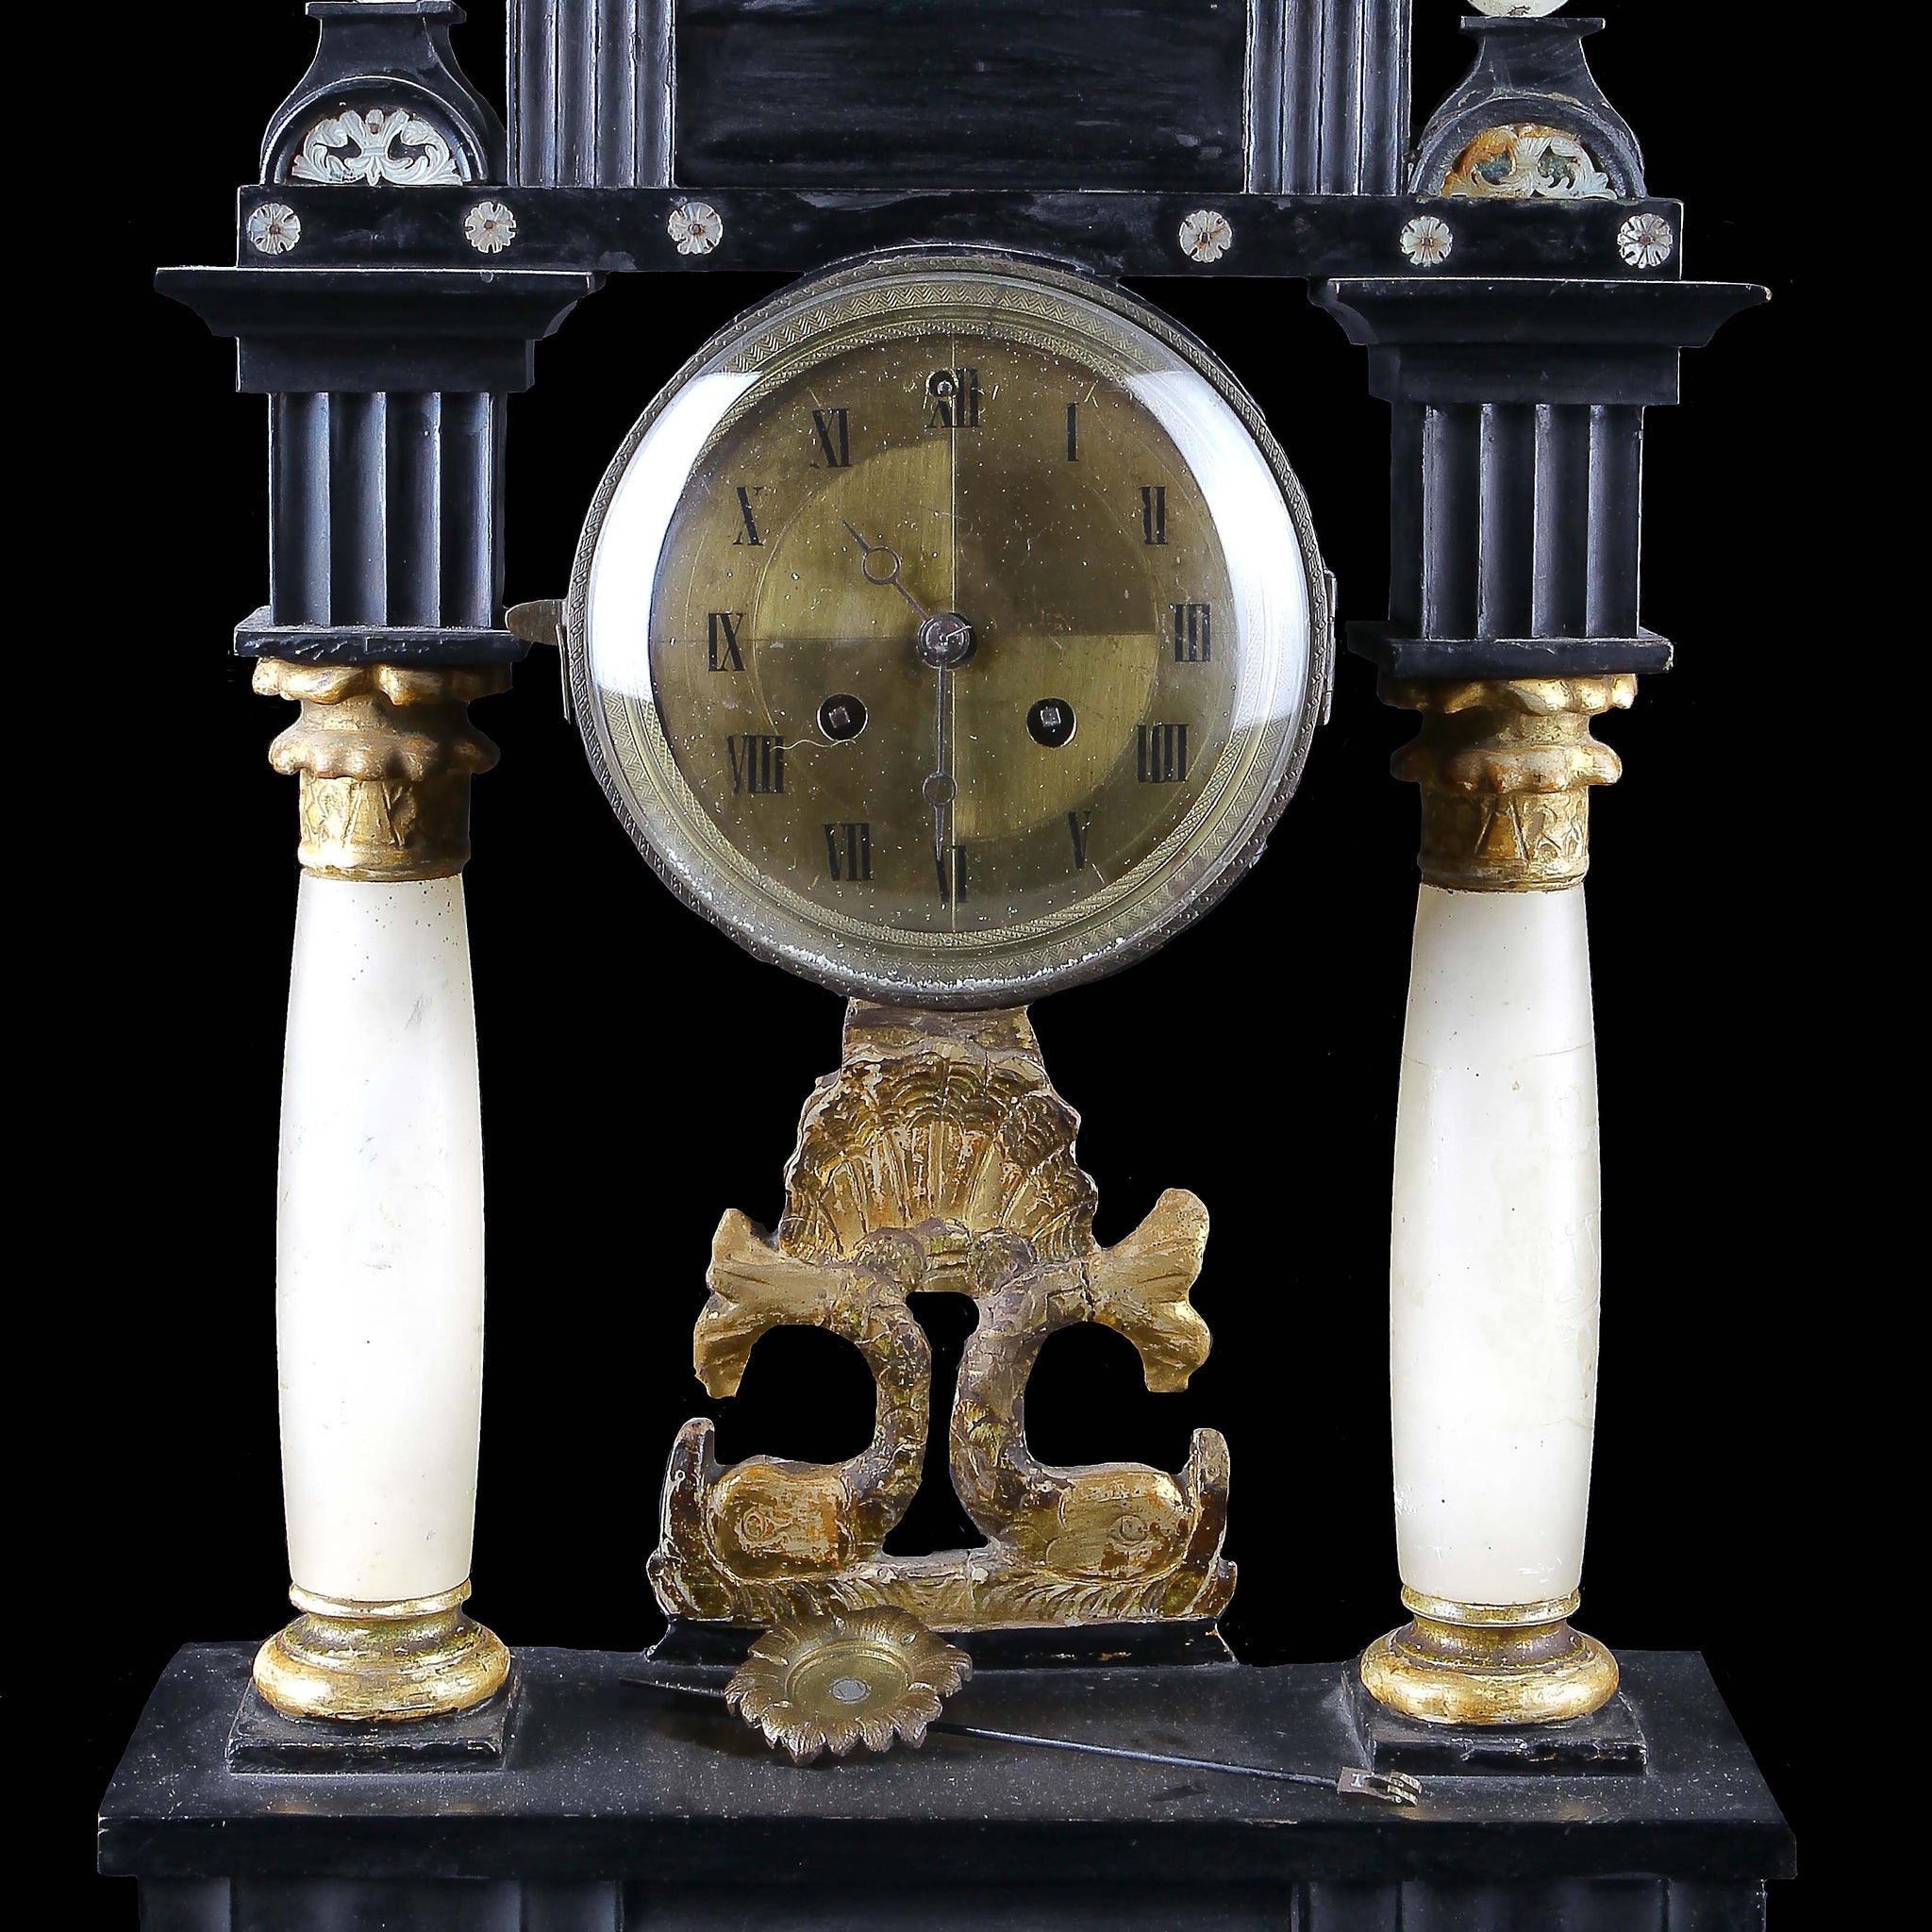 Antique Italian mantel clock from the 19th century in black lacquered wood with alabaster